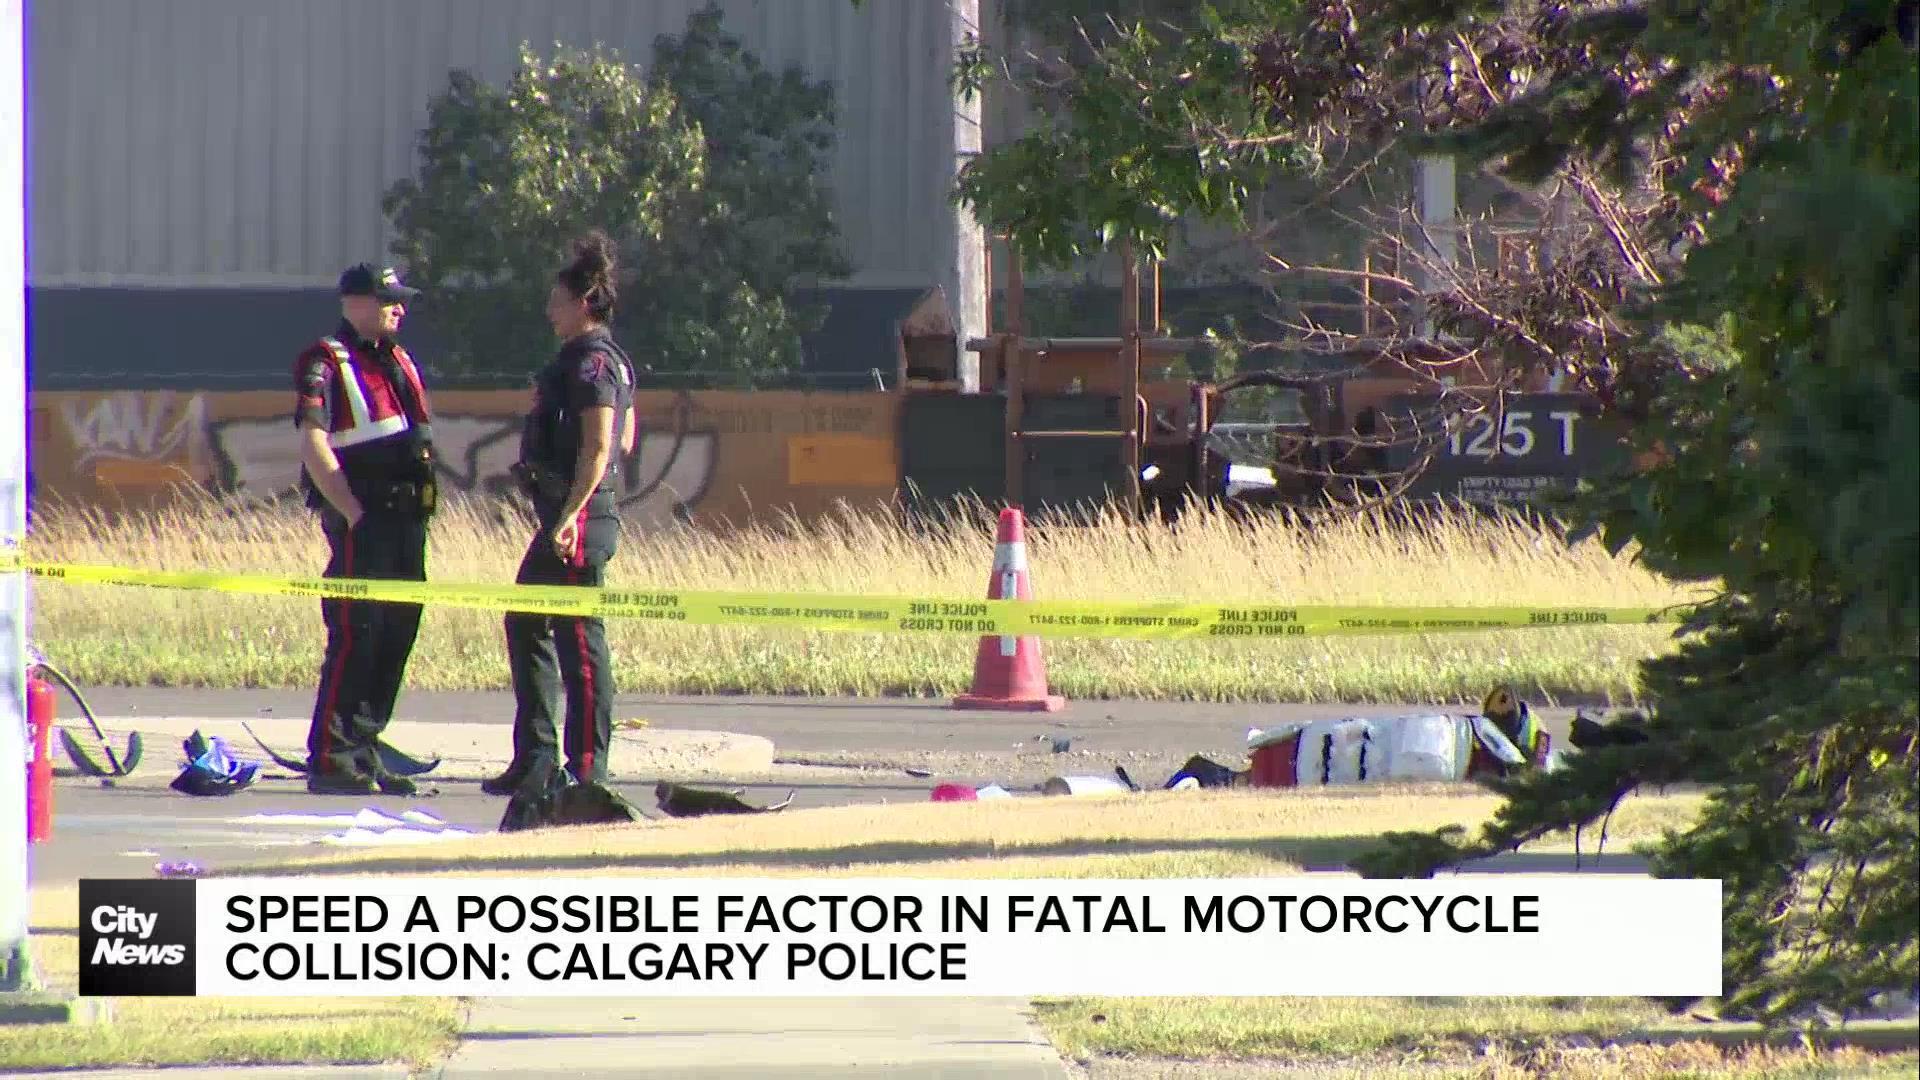 Speed a possible factor in fatal motorcycle collision: Calgary police